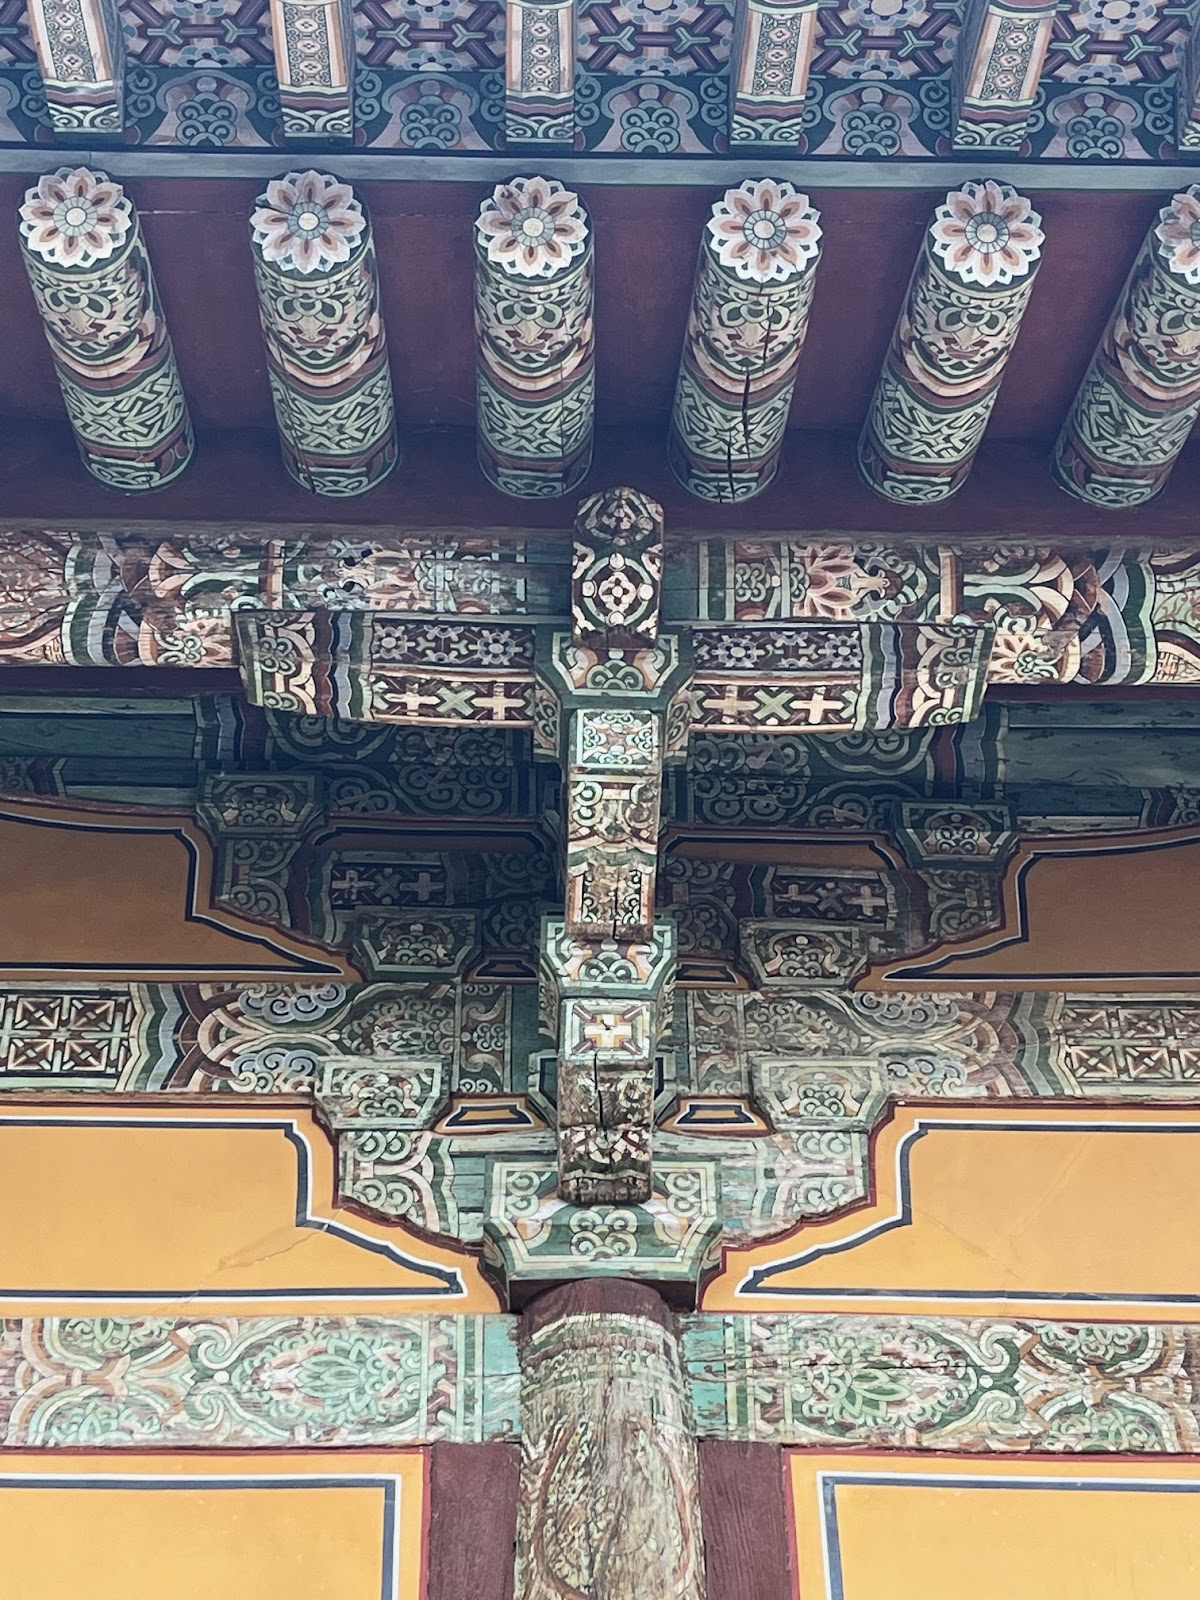 Underneath the varied temple building at the oldest temple in South Korea.